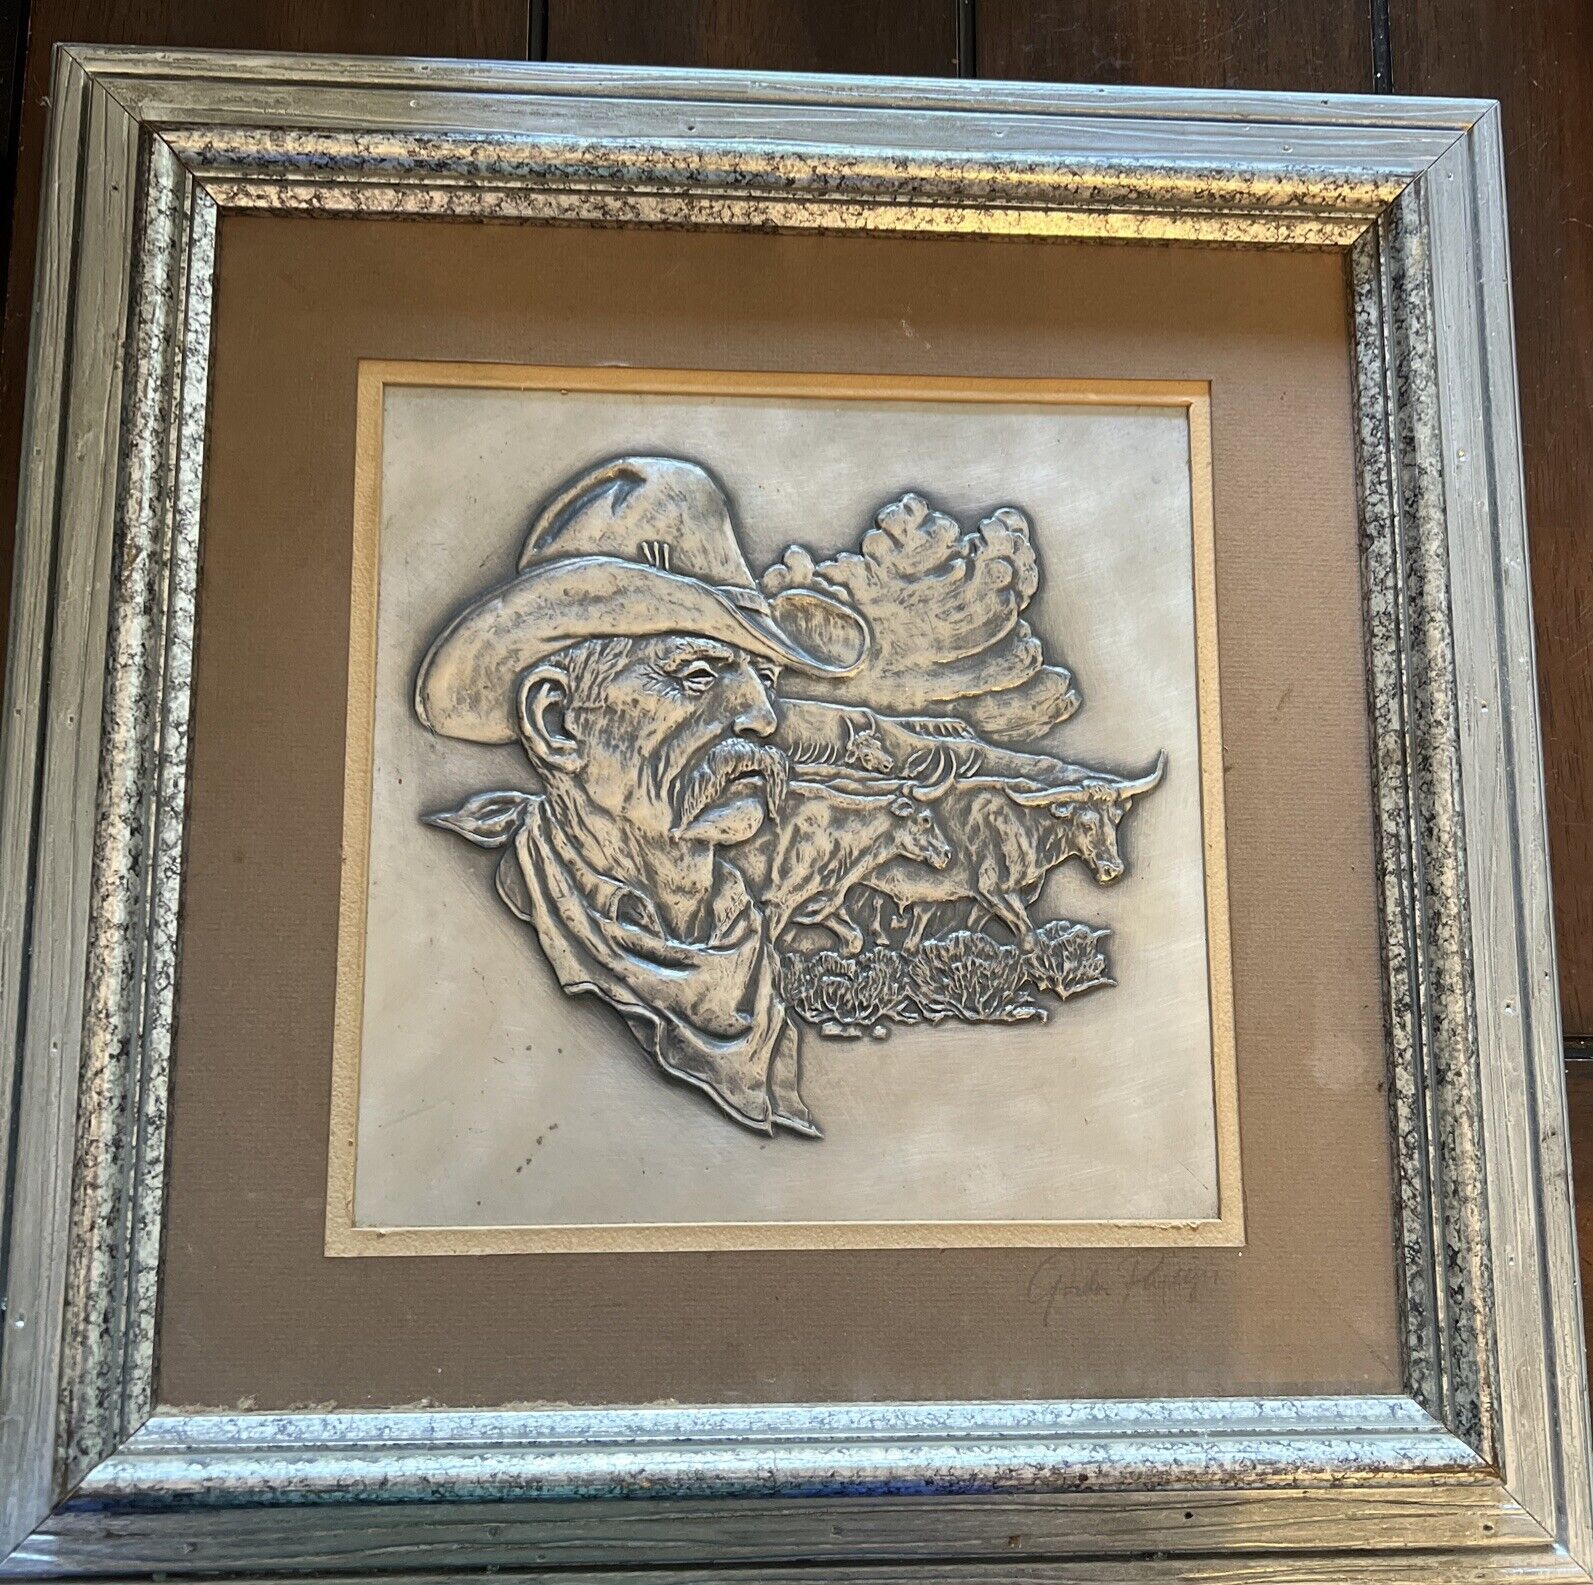 Gordon Phillips Western Relief Wall Sculpture In The Collection “The Westerners”